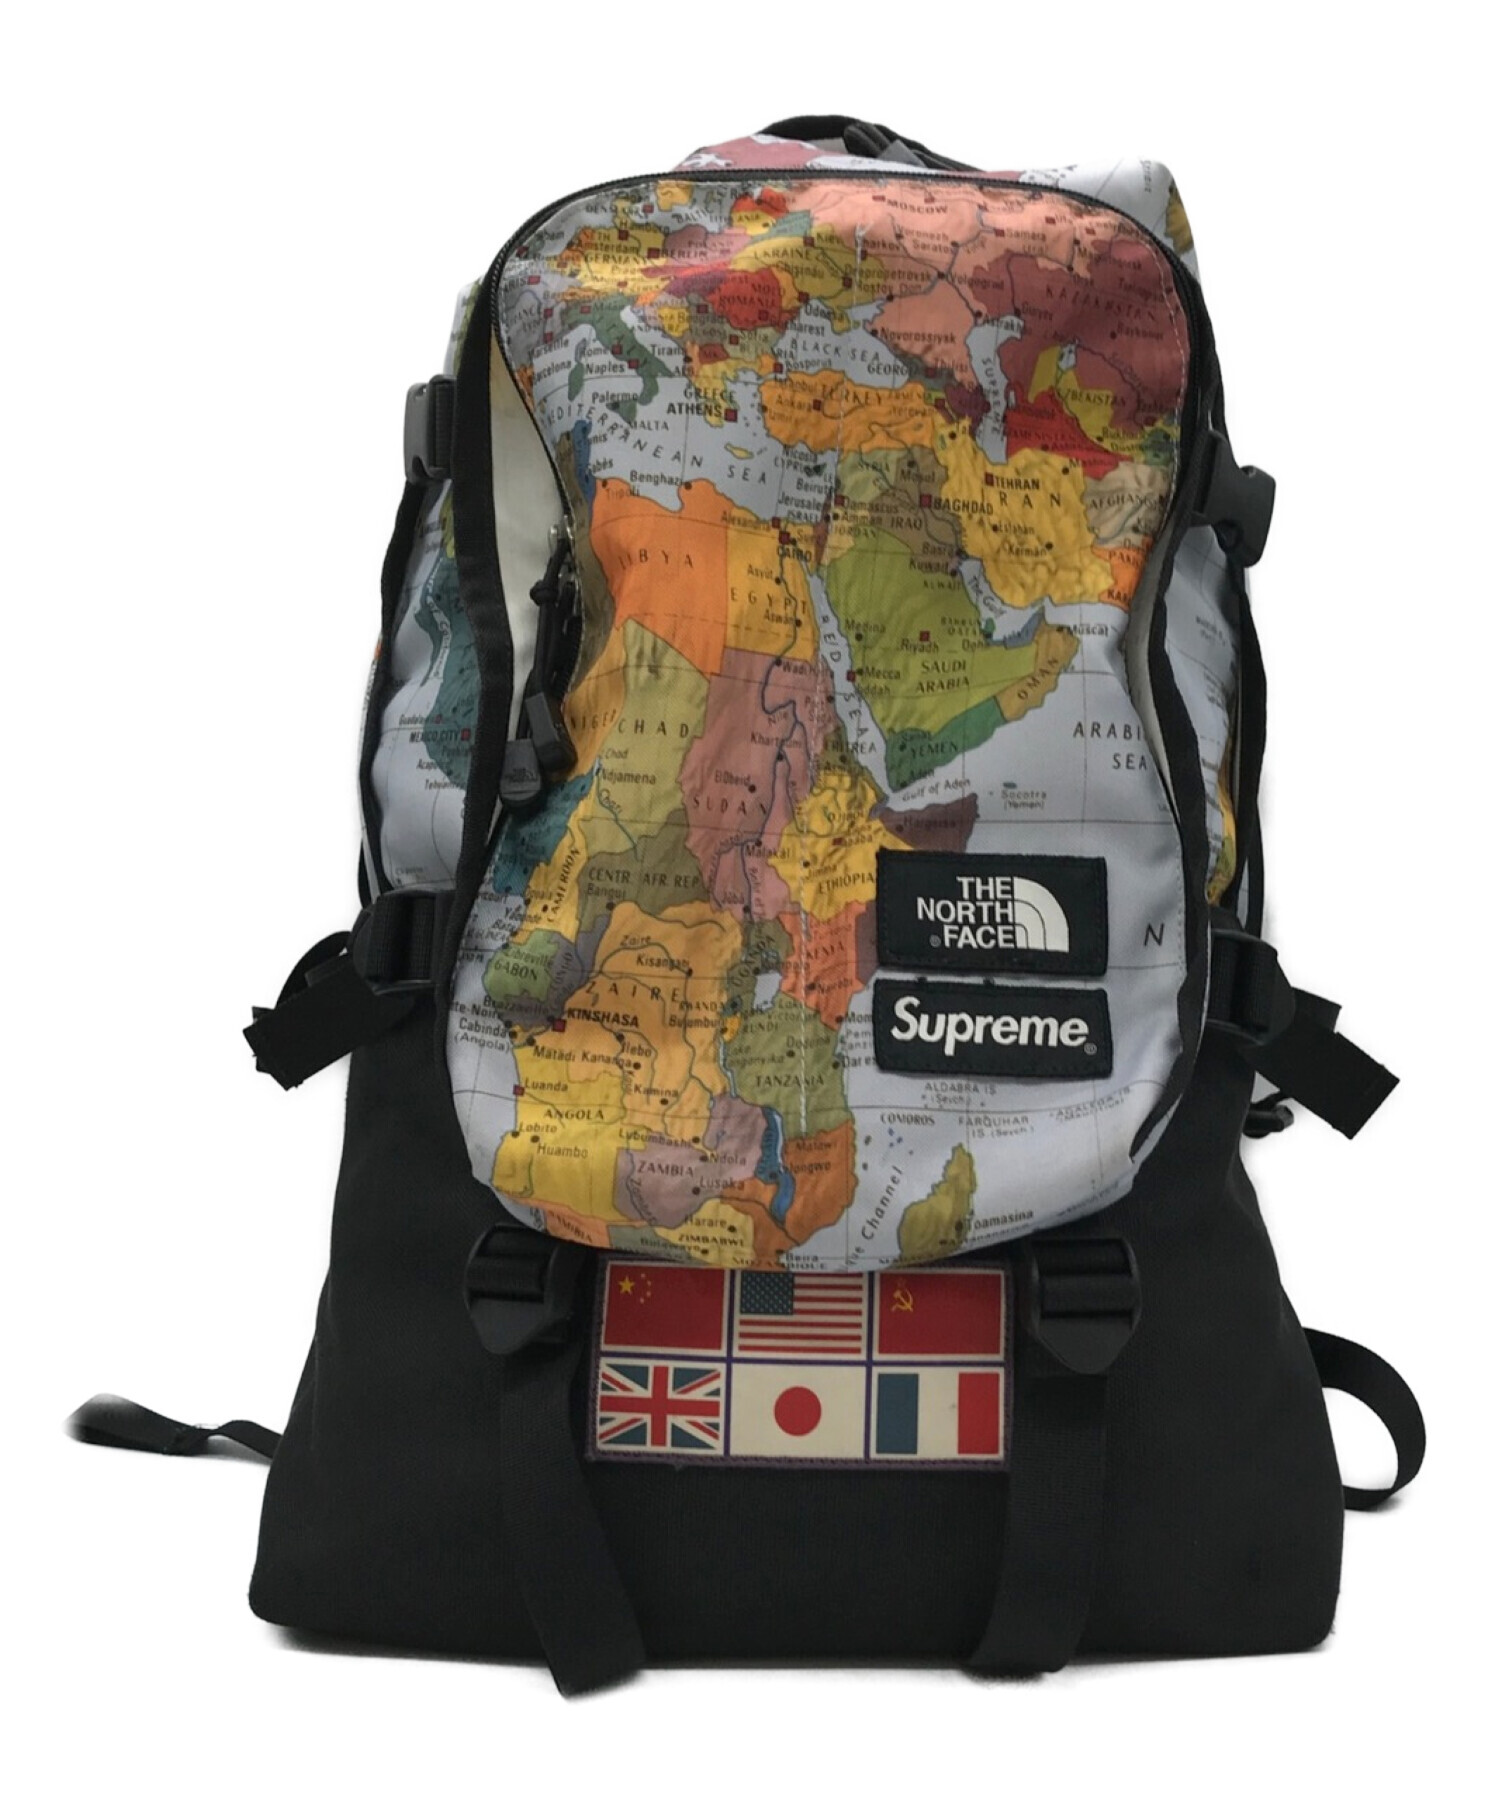 SUPREME×THE NORTH FACE 14SS ‘Expedition Medium Day Pack Backpack’　 エクスペディションミディアムデイパックバックパック　リュック ブラック×ブルー